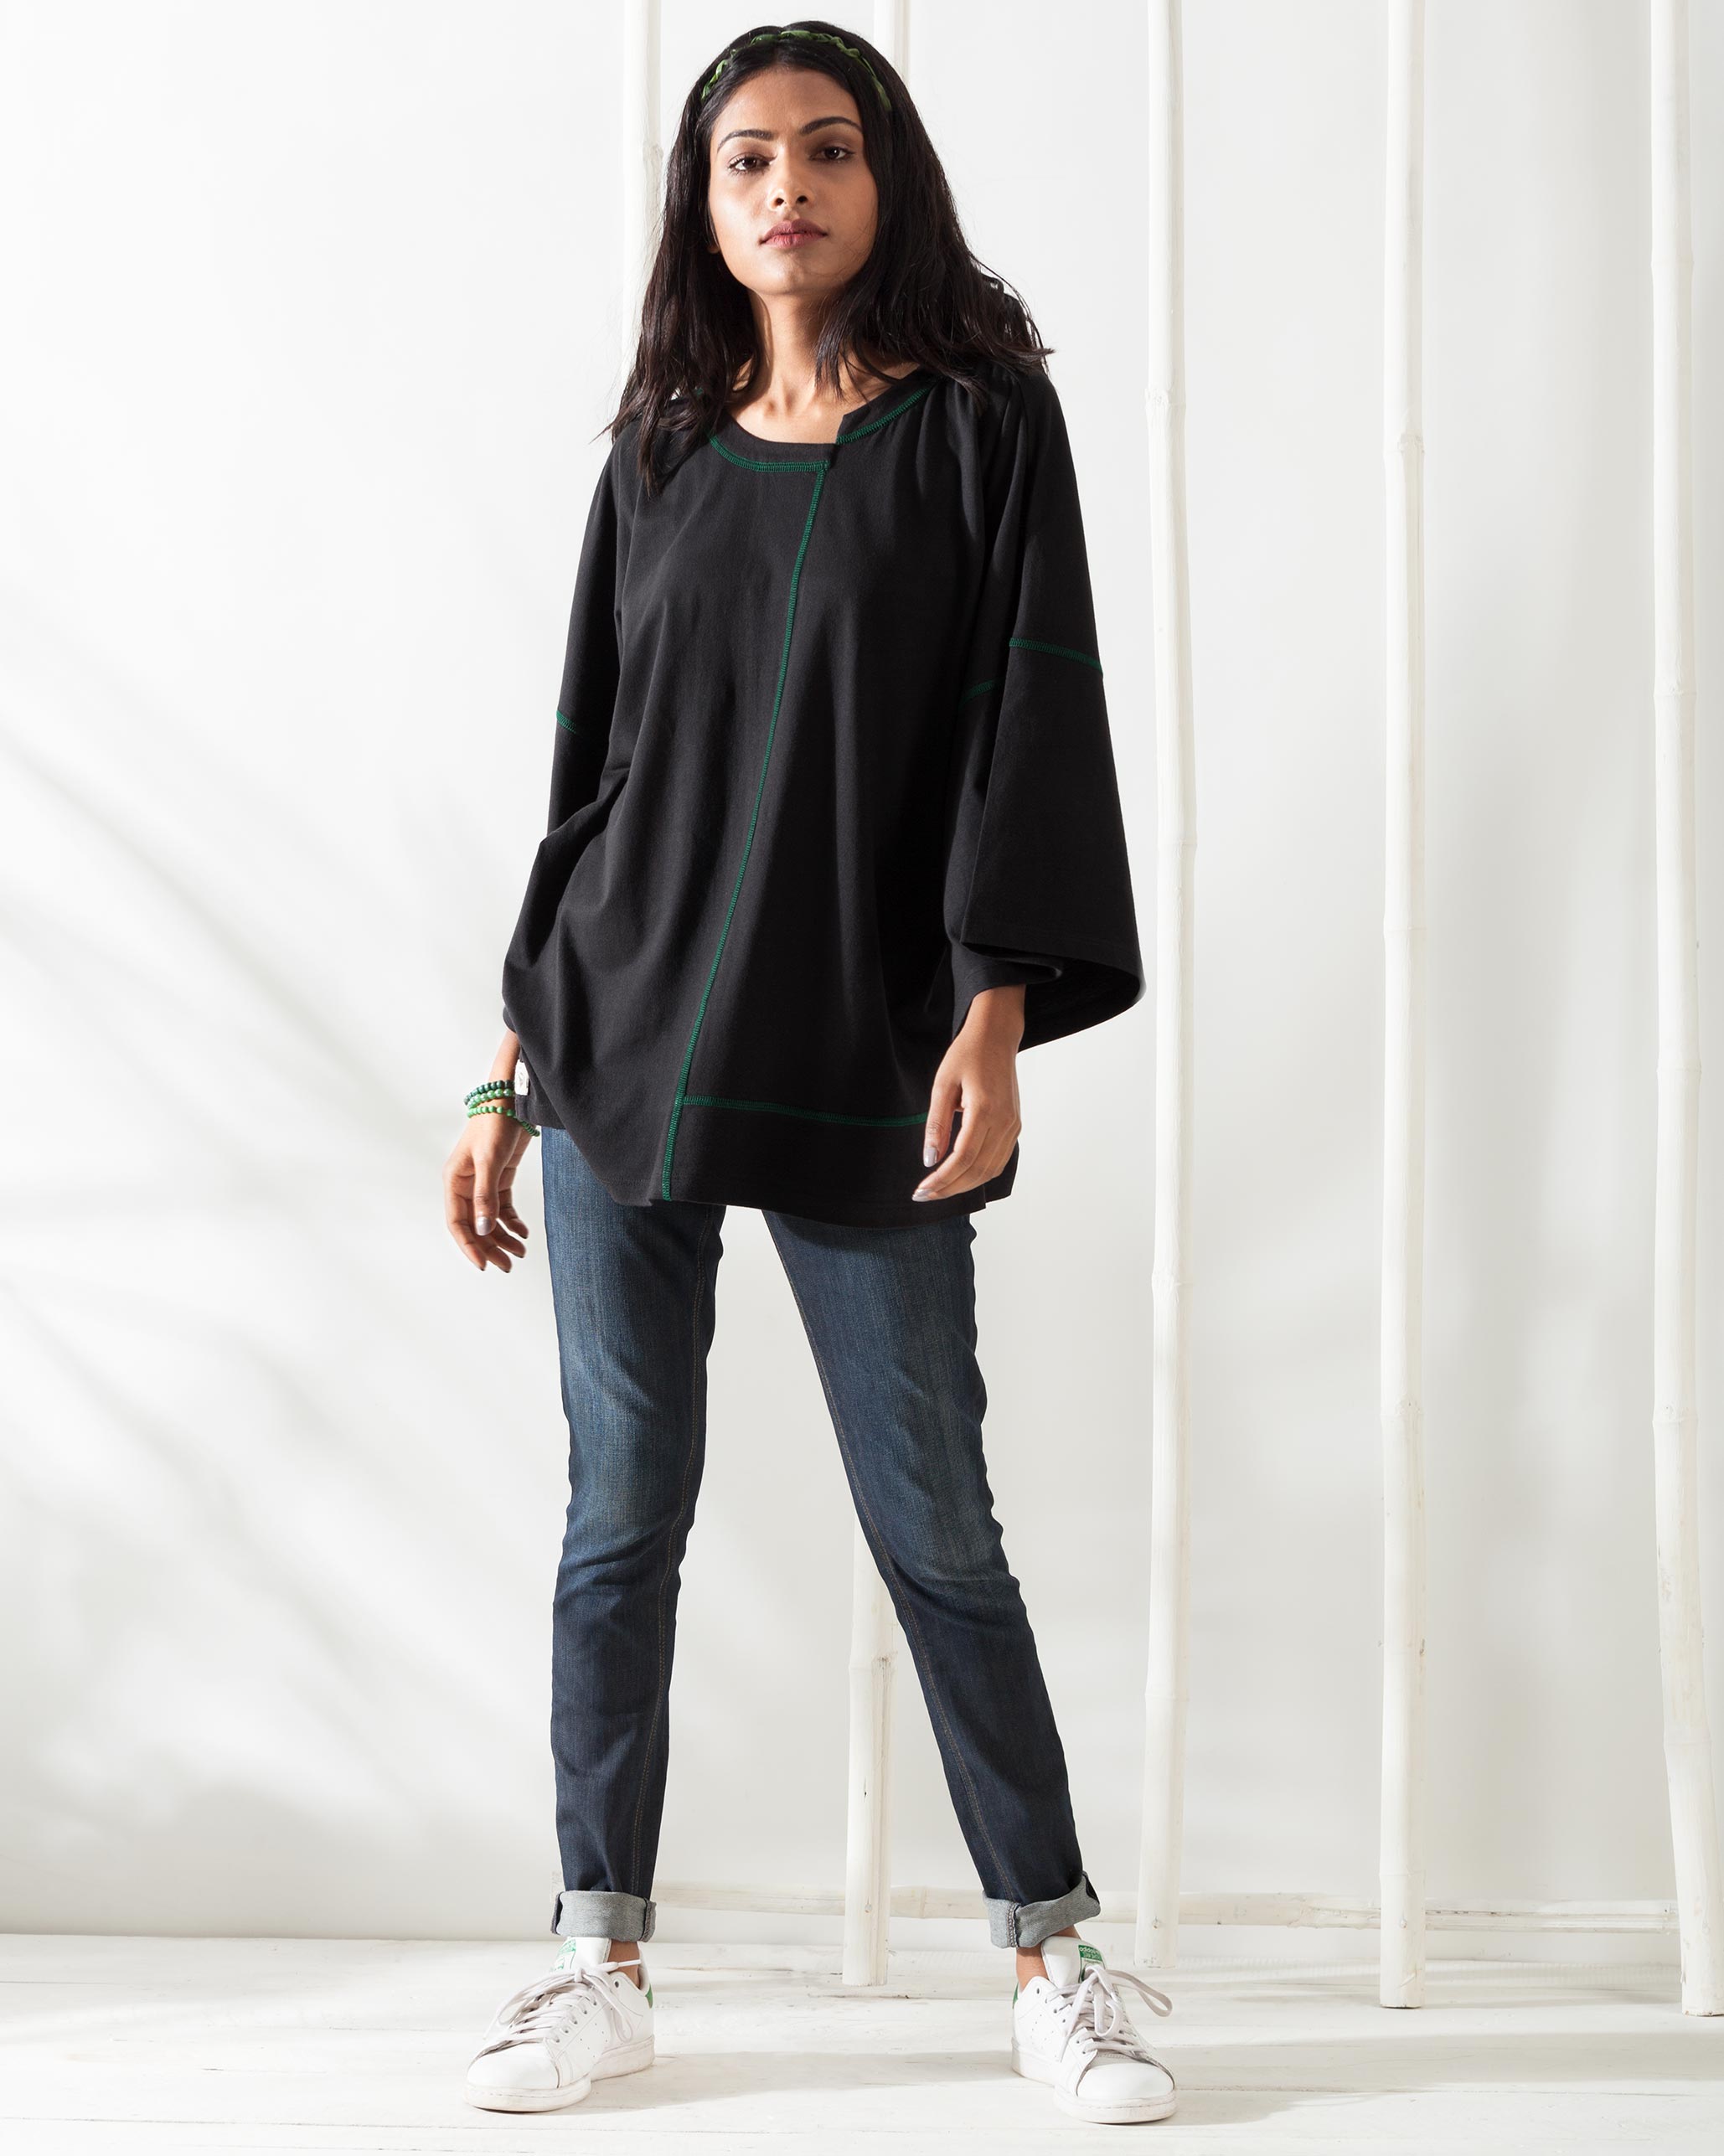 The Layover Top - Black